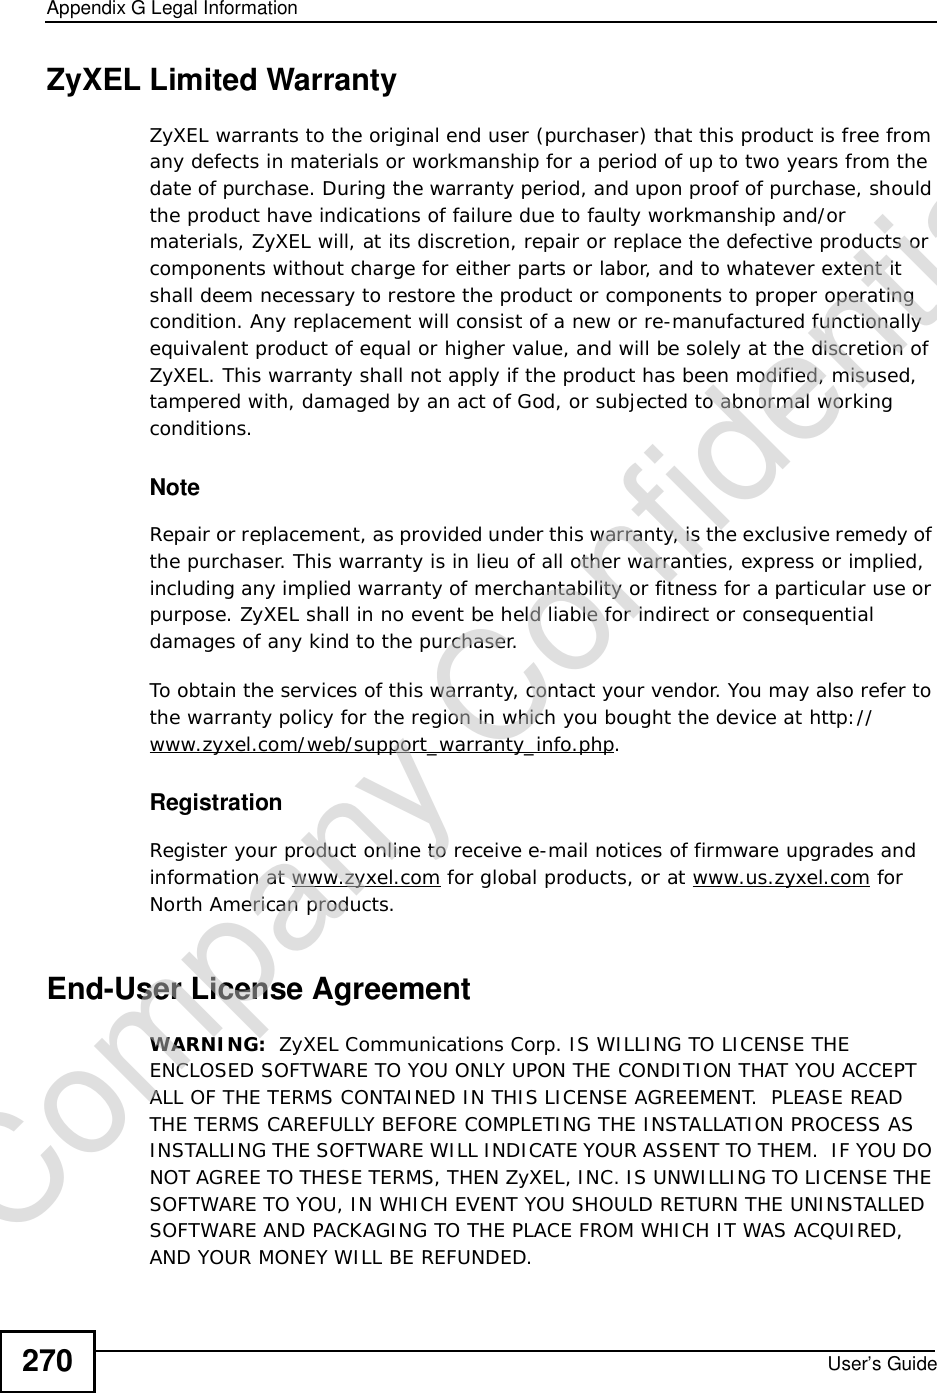 Appendix GLegal InformationUser’s Guide270ZyXEL Limited WarrantyZyXEL warrants to the original end user (purchaser) that this product is free from any defects in materials or workmanship for a period of up to two years from the date of purchase. During the warranty period, and upon proof of purchase, should the product have indications of failure due to faulty workmanship and/or materials, ZyXEL will, at its discretion, repair or replace the defective products or components without charge for either parts or labor, and to whatever extent it shall deem necessary to restore the product or components to proper operating condition. Any replacement will consist of a new or re-manufactured functionally equivalent product of equal or higher value, and will be solely at the discretion of ZyXEL. This warranty shall not apply if the product has been modified, misused, tampered with, damaged by an act of God, or subjected to abnormal working conditions.NoteRepair or replacement, as provided under this warranty, is the exclusive remedy of the purchaser. This warranty is in lieu of all other warranties, express or implied, including any implied warranty of merchantability or fitness for a particular use or purpose. ZyXEL shall in no event be held liable for indirect or consequential damages of any kind to the purchaser.To obtain the services of this warranty, contact your vendor. You may also refer to the warranty policy for the region in which you bought the device at http://www.zyxel.com/web/support_warranty_info.php.RegistrationRegister your product online to receive e-mail notices of firmware upgrades and information at www.zyxel.com for global products, or at www.us.zyxel.com for North American products.End-User License AgreementWARNING:  ZyXEL Communications Corp. IS WILLING TO LICENSE THE ENCLOSED SOFTWARE TO YOU ONLY UPON THE CONDITION THAT YOU ACCEPT ALL OF THE TERMS CONTAINED IN THIS LICENSE AGREEMENT.  PLEASE READ THE TERMS CAREFULLY BEFORE COMPLETING THE INSTALLATION PROCESS AS INSTALLING THE SOFTWARE WILL INDICATE YOUR ASSENT TO THEM.  IF YOU DO NOT AGREE TO THESE TERMS, THEN ZyXEL, INC. IS UNWILLING TO LICENSE THE SOFTWARE TO YOU, IN WHICH EVENT YOU SHOULD RETURN THE UNINSTALLED SOFTWARE AND PACKAGING TO THE PLACE FROM WHICH IT WAS ACQUIRED, AND YOUR MONEY WILL BE REFUNDED.Company Confidential